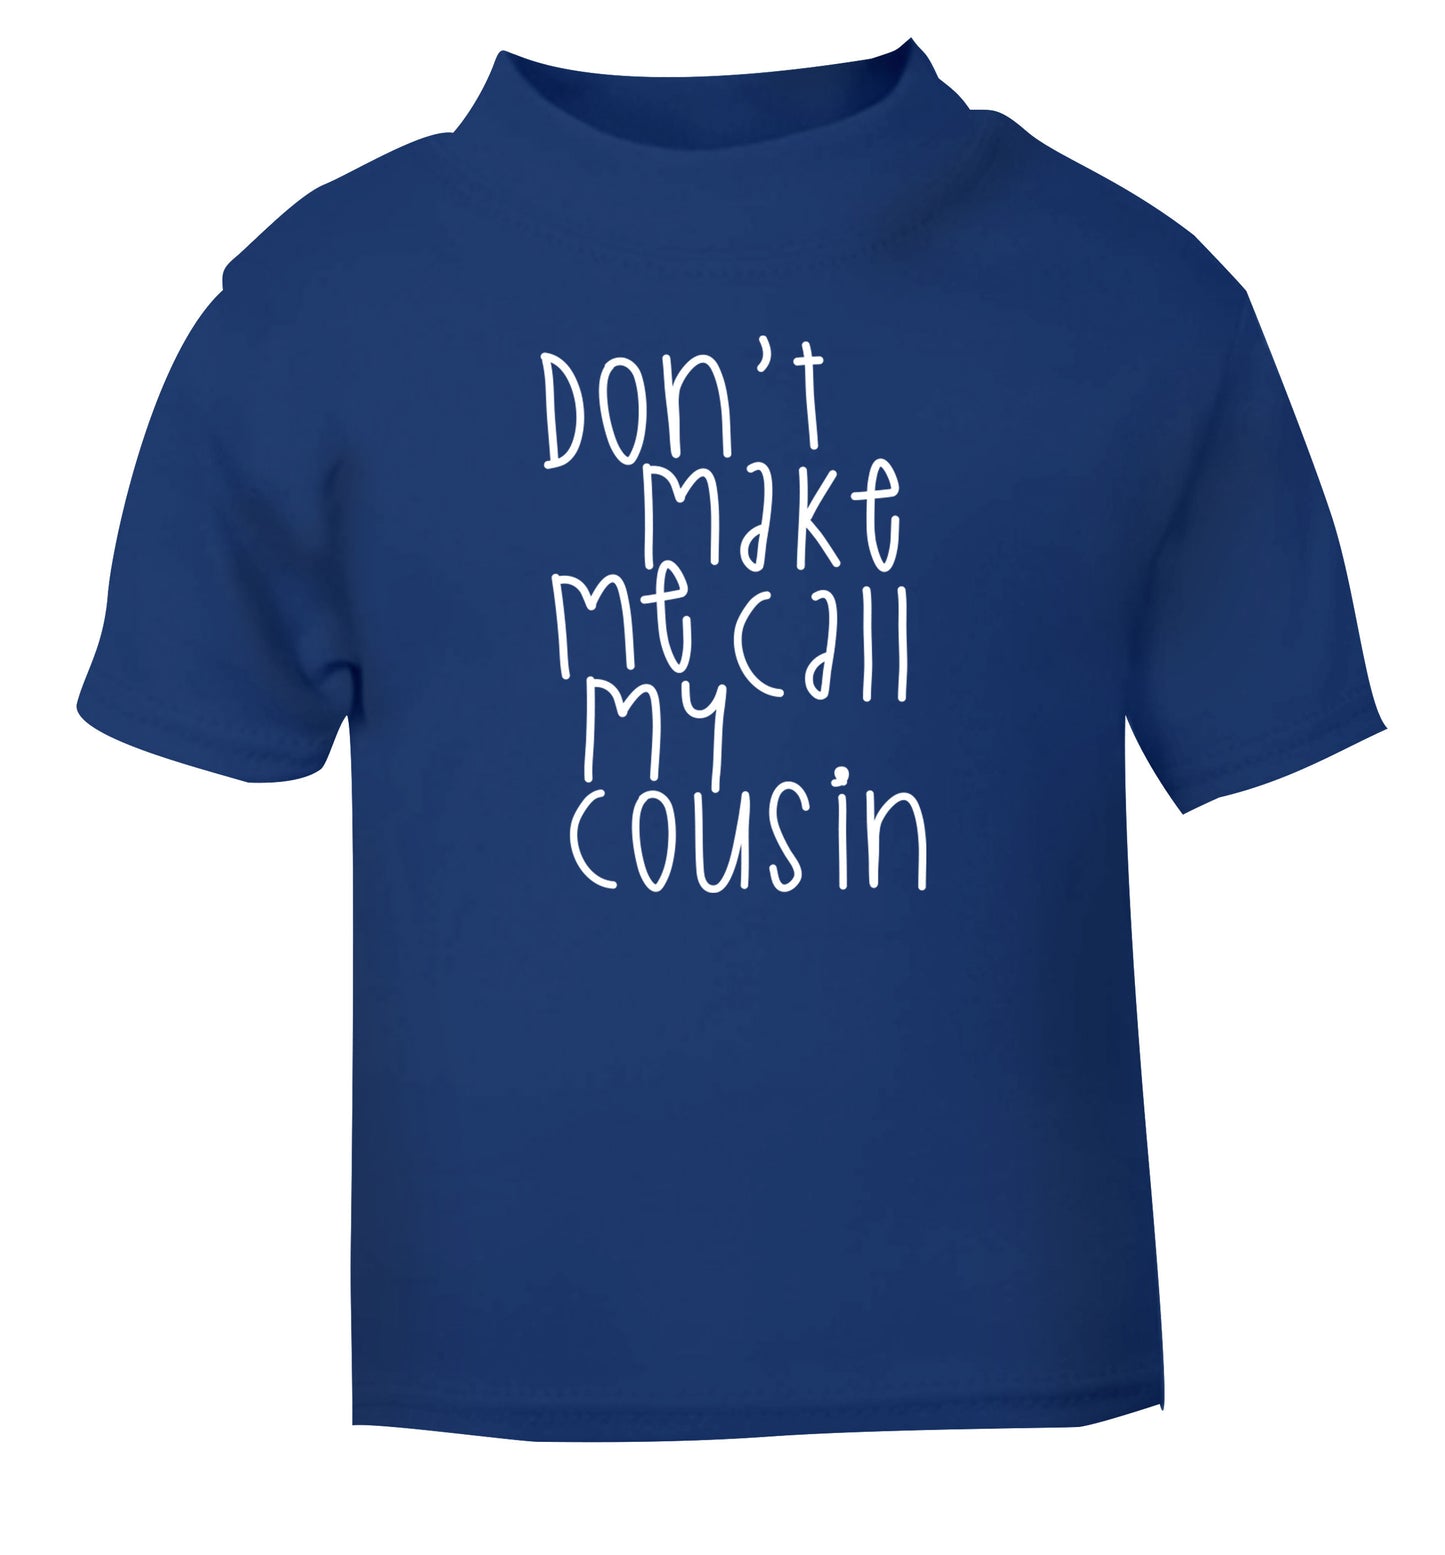 Don't make me call my cousin blue Baby Toddler Tshirt 2 Years